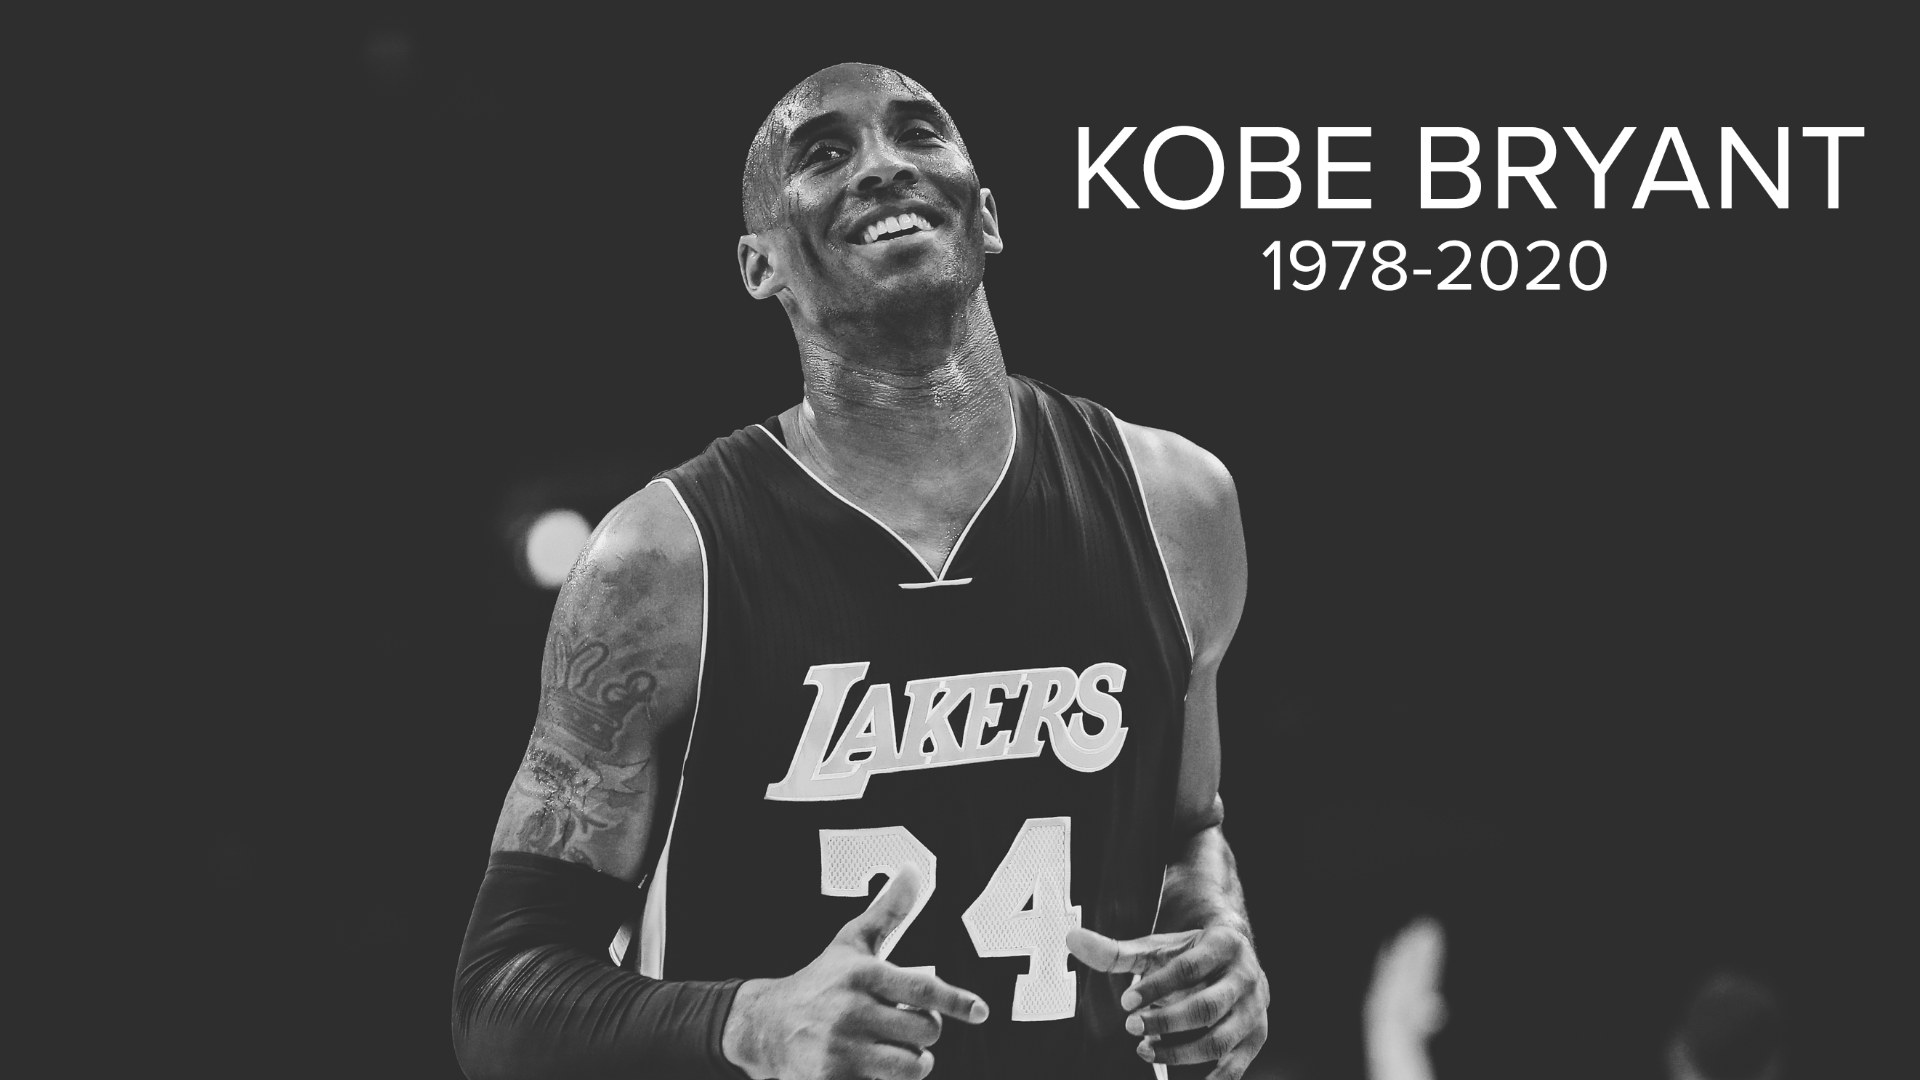 Everything we know about the 9 victims in the Kobe Bryant